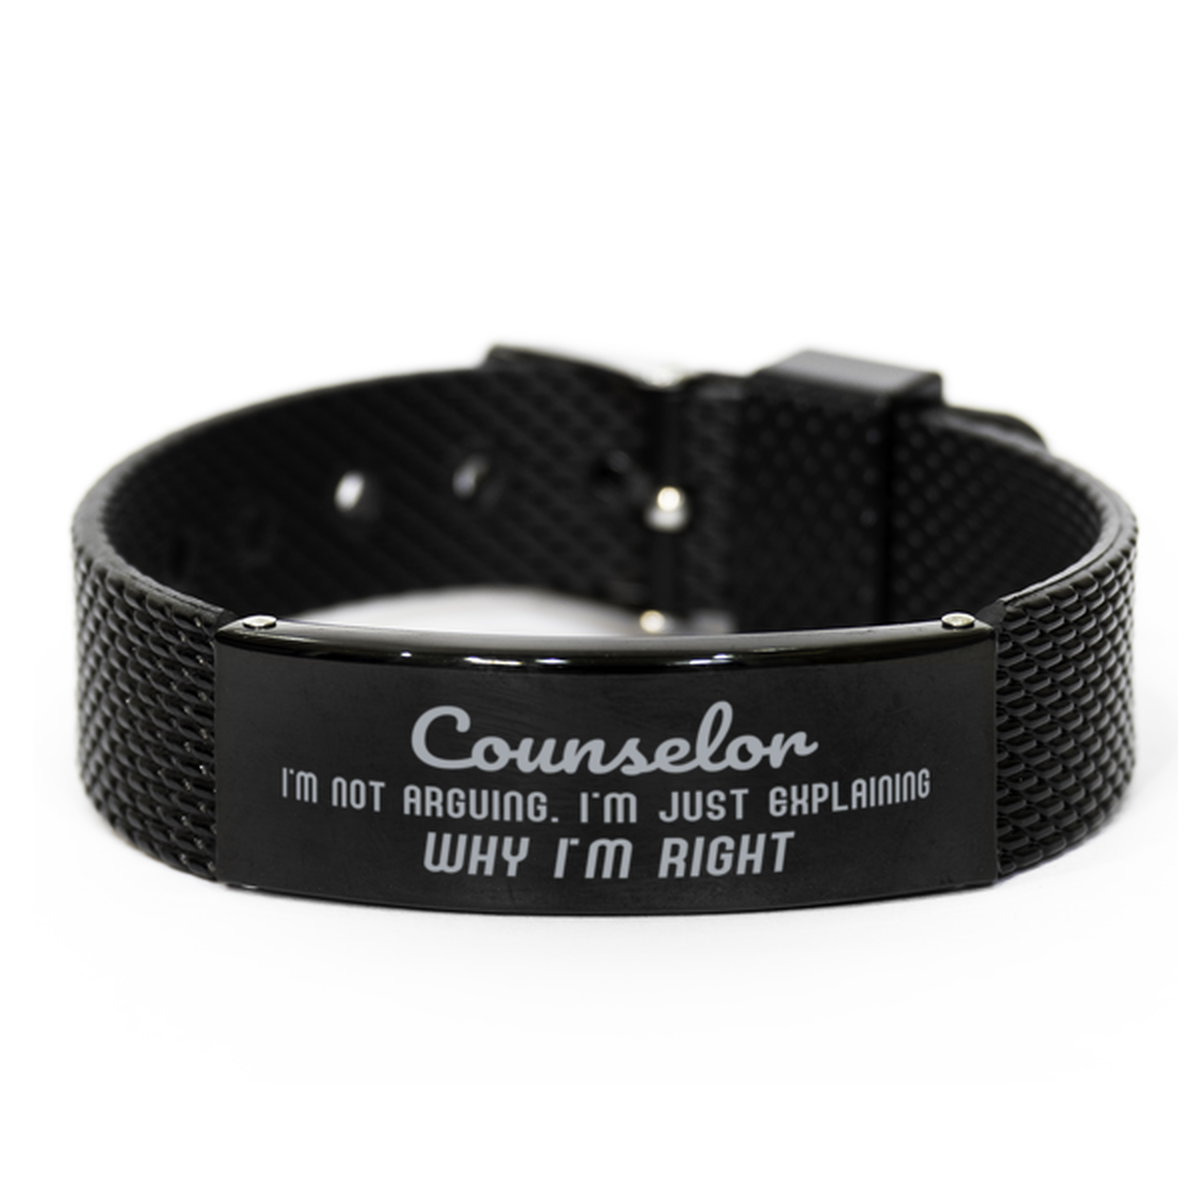 Counselor I'm not Arguing. I'm Just Explaining Why I'm RIGHT Black Shark Mesh Bracelet, Funny Saying Quote Counselor Gifts For Counselor Graduation Birthday Christmas Gifts for Men Women Coworker